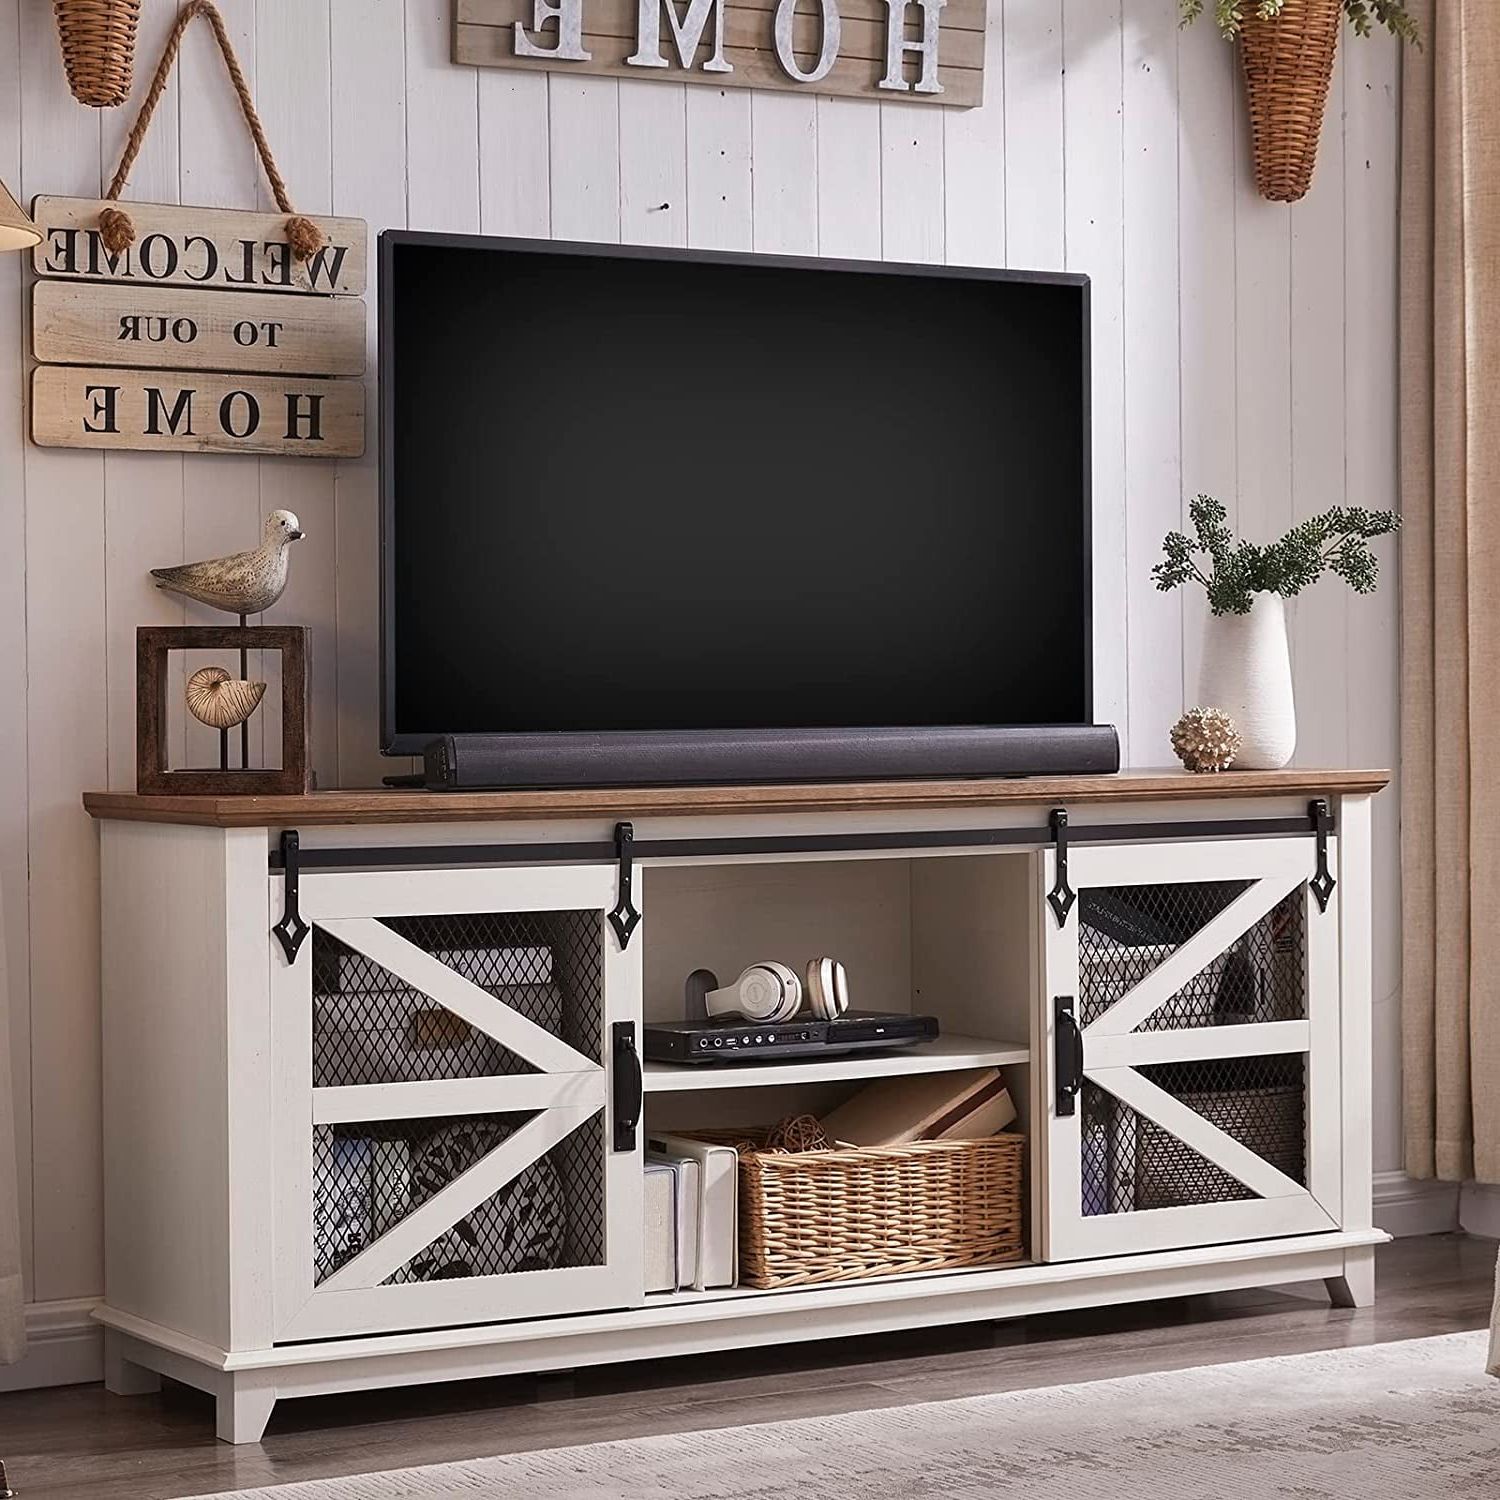 Okd Farmhouse Tv Stand For 75+ Inch Tv, Entertainment Center With  Adjustable Shelves For Living Room, Antique White – Walmart For Farmhouse Stands With Shelves (Gallery 9 of 20)